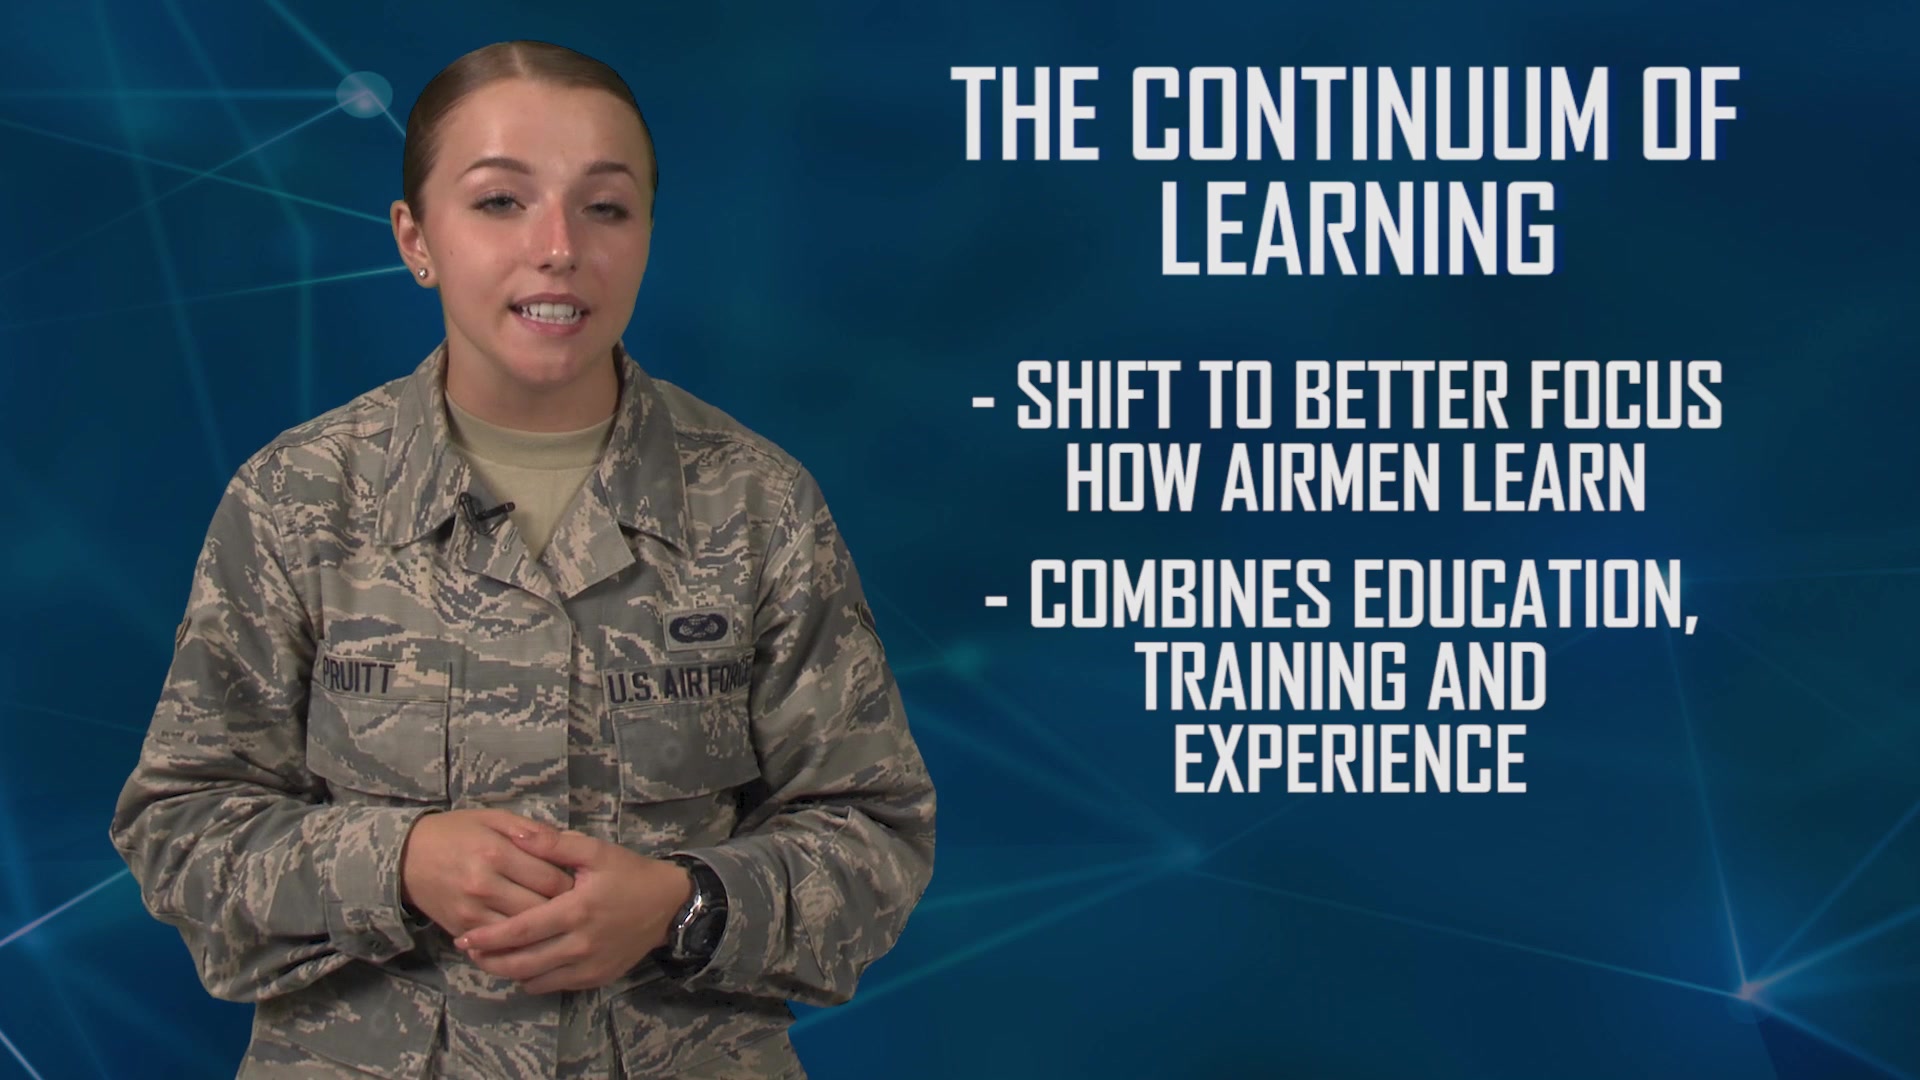 Did you know AETC is reimagining how Airmen are being developed by empowering the learning enterprise to be proactive vs reactive? Have you heard of the "Continuum of Learning" and want to know more about how training, education and experiences are being combined to prepare Airmen with current and future competencies? 

Check out this quick overview of the Continuum of Learning, AETC's new learning paradigm, and how it works hand in hand with Airmen and overall force development!